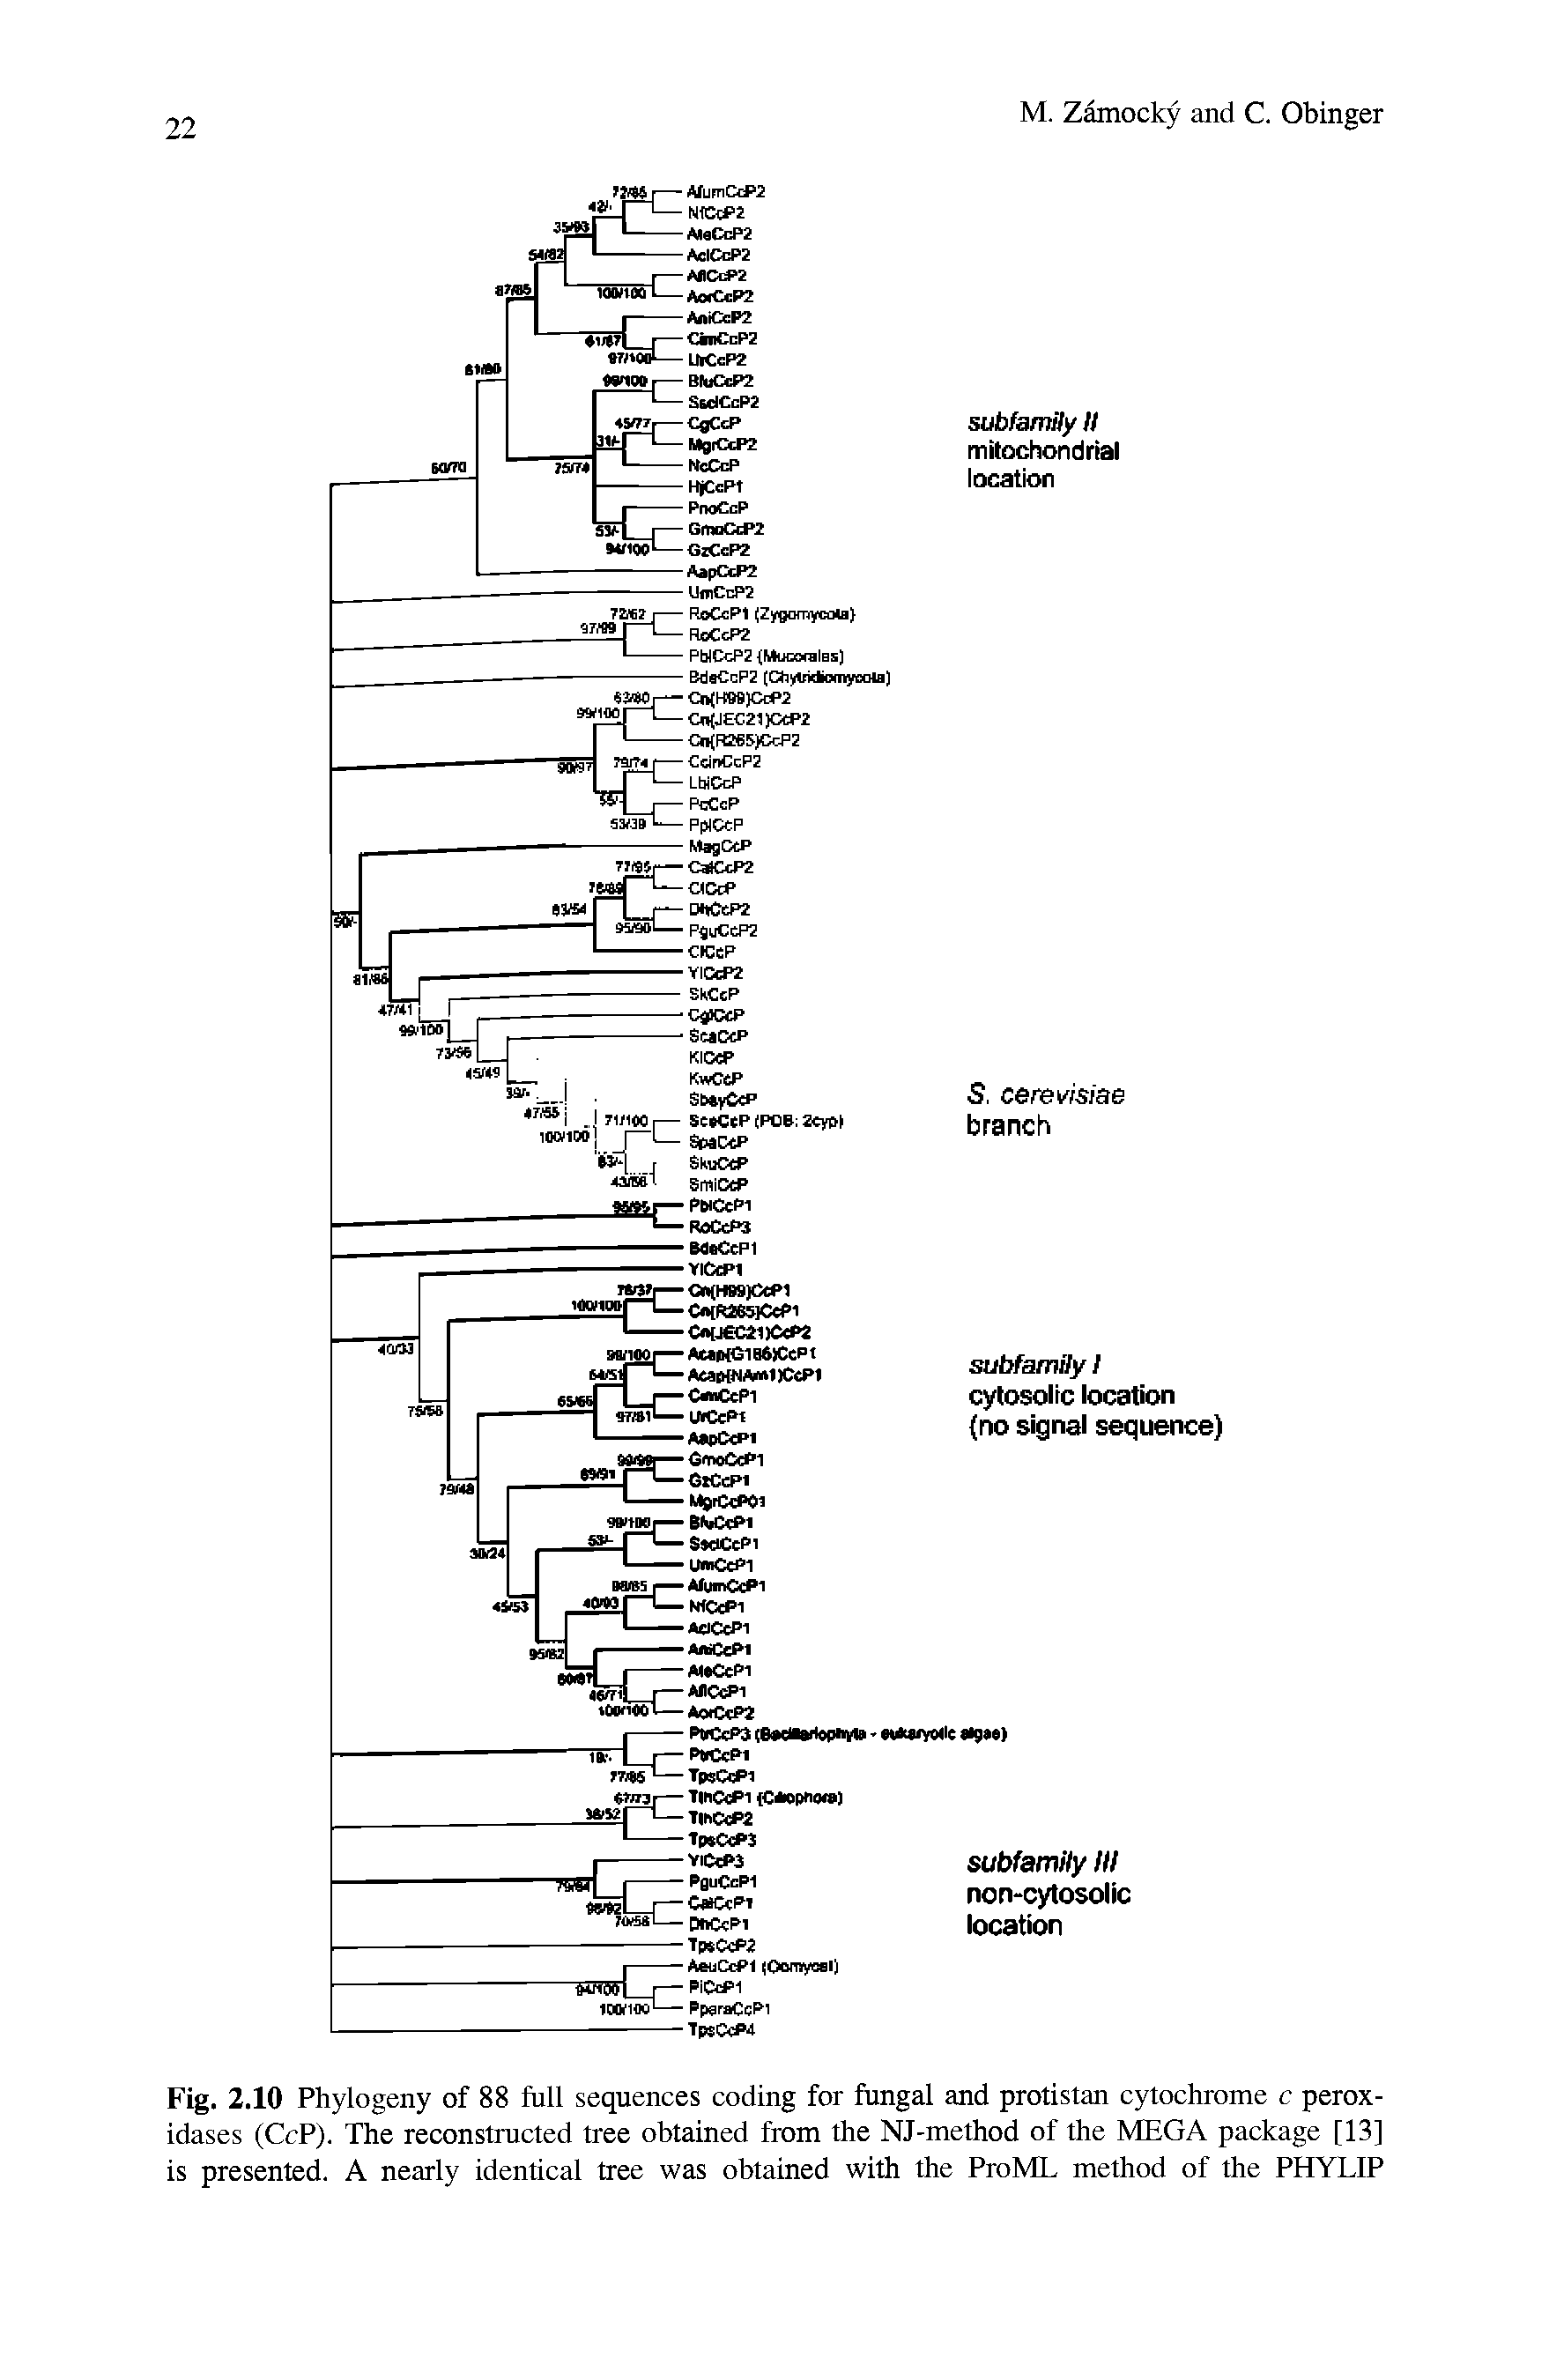 Fig. 2.10 Phylogeny of 88 full sequences coding for fungal and protistan cytochrome c peroxidases (CcP). The reconstructed tree obtained from the NJ-method of the MEGA package [13] is presented. A nearly identical tree was obtained with the ProML method of the PHYLIP...